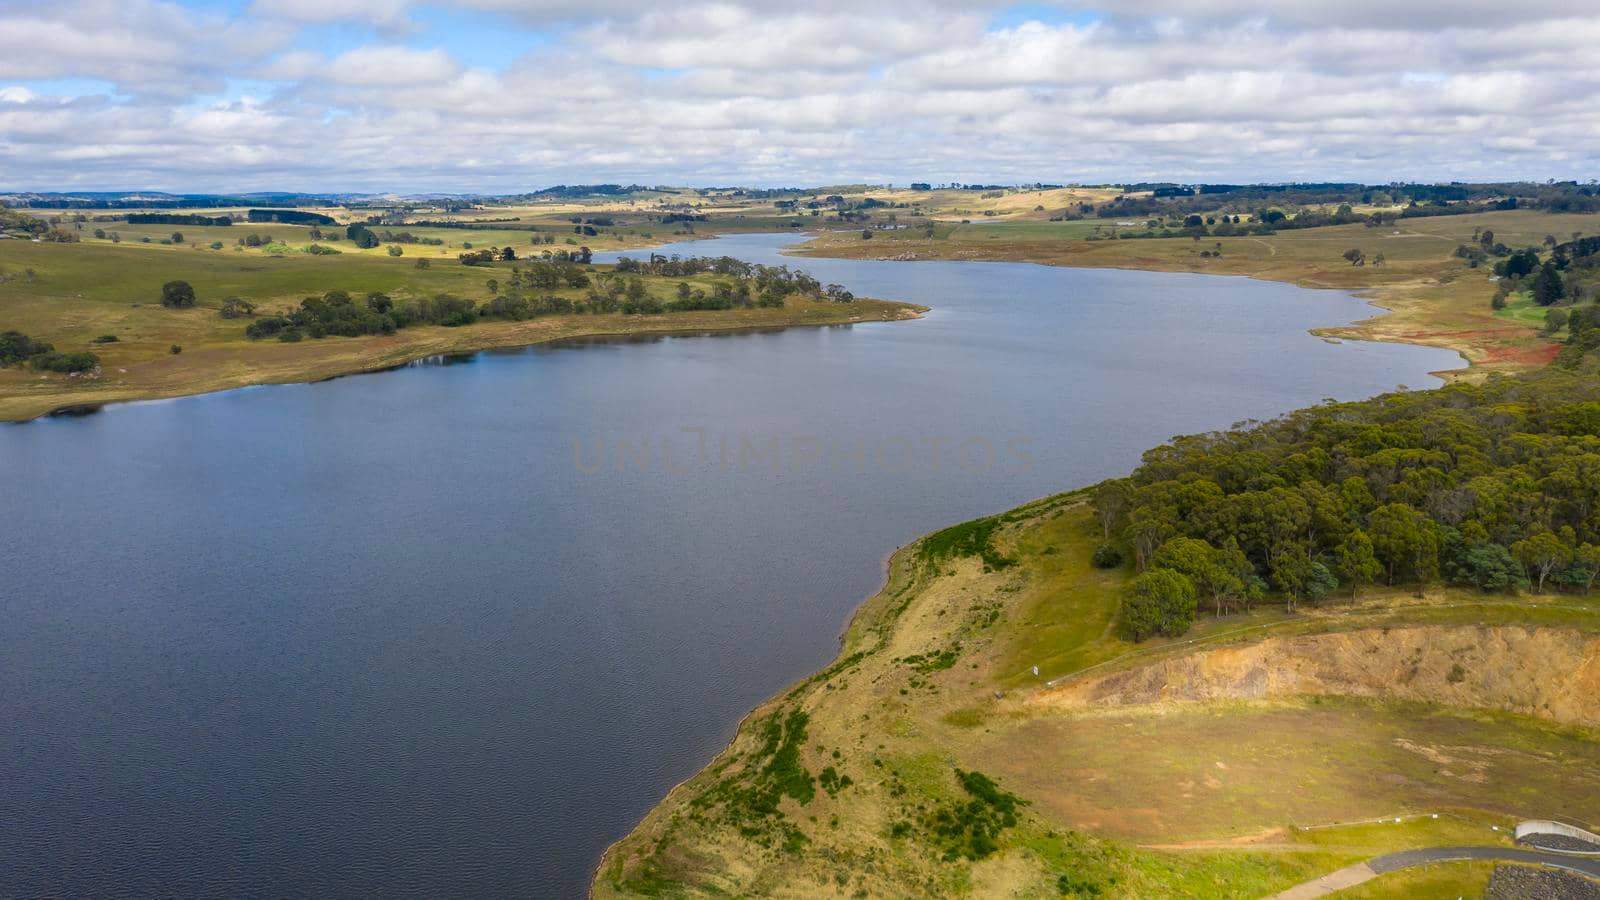 Aerial view of the Oberon Dam in the Central Tablelands in regional New South Wales in Australia